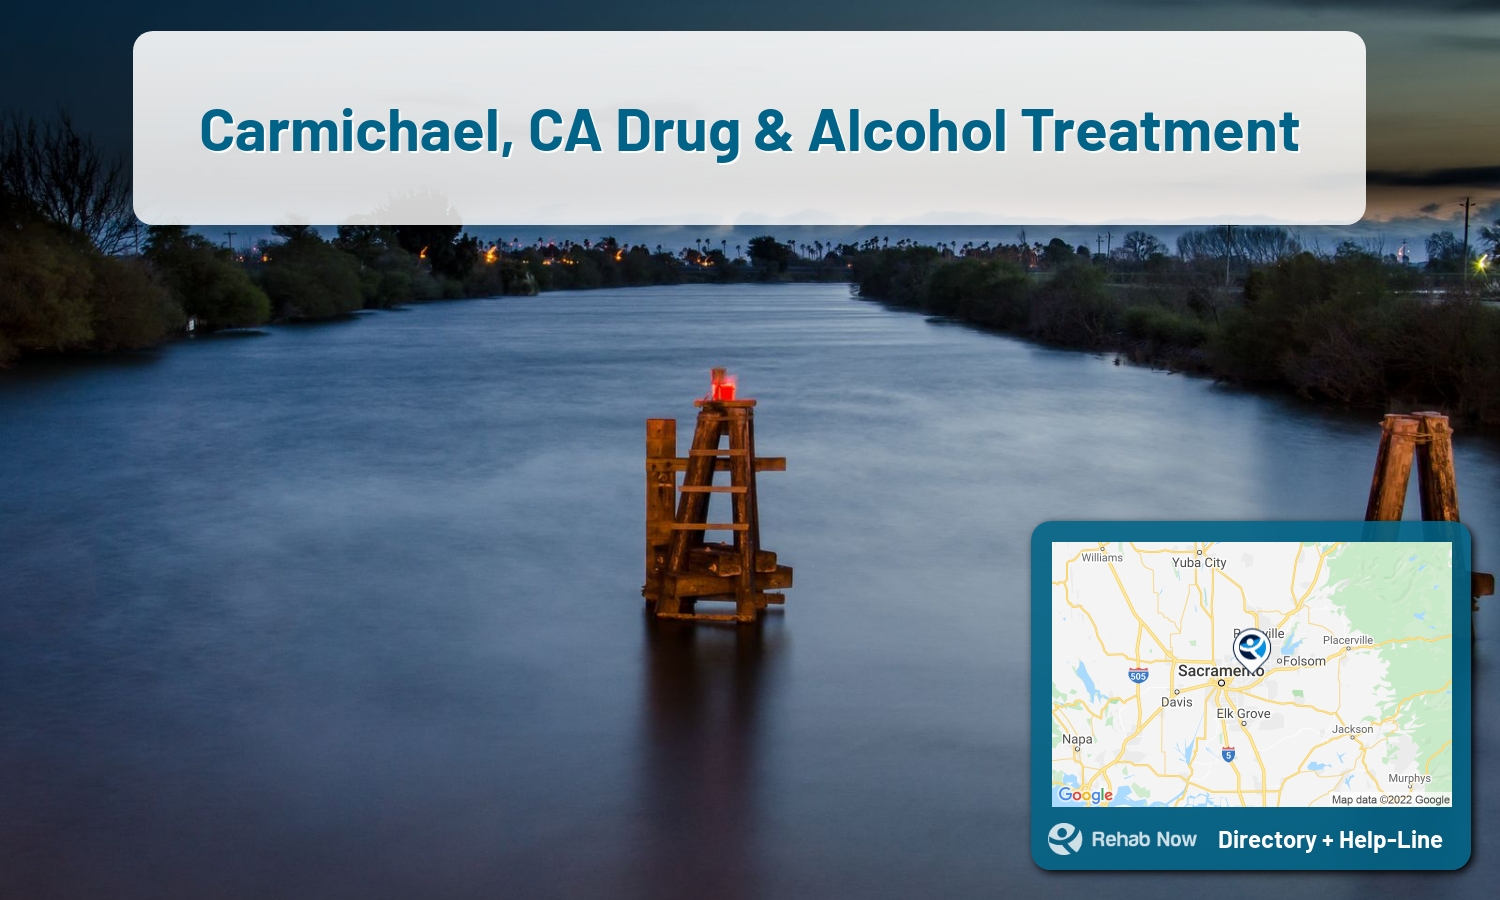 Carmichael, CA Treatment Centers. Find drug rehab in Carmichael, California, or detox and treatment programs. Get the right help now!